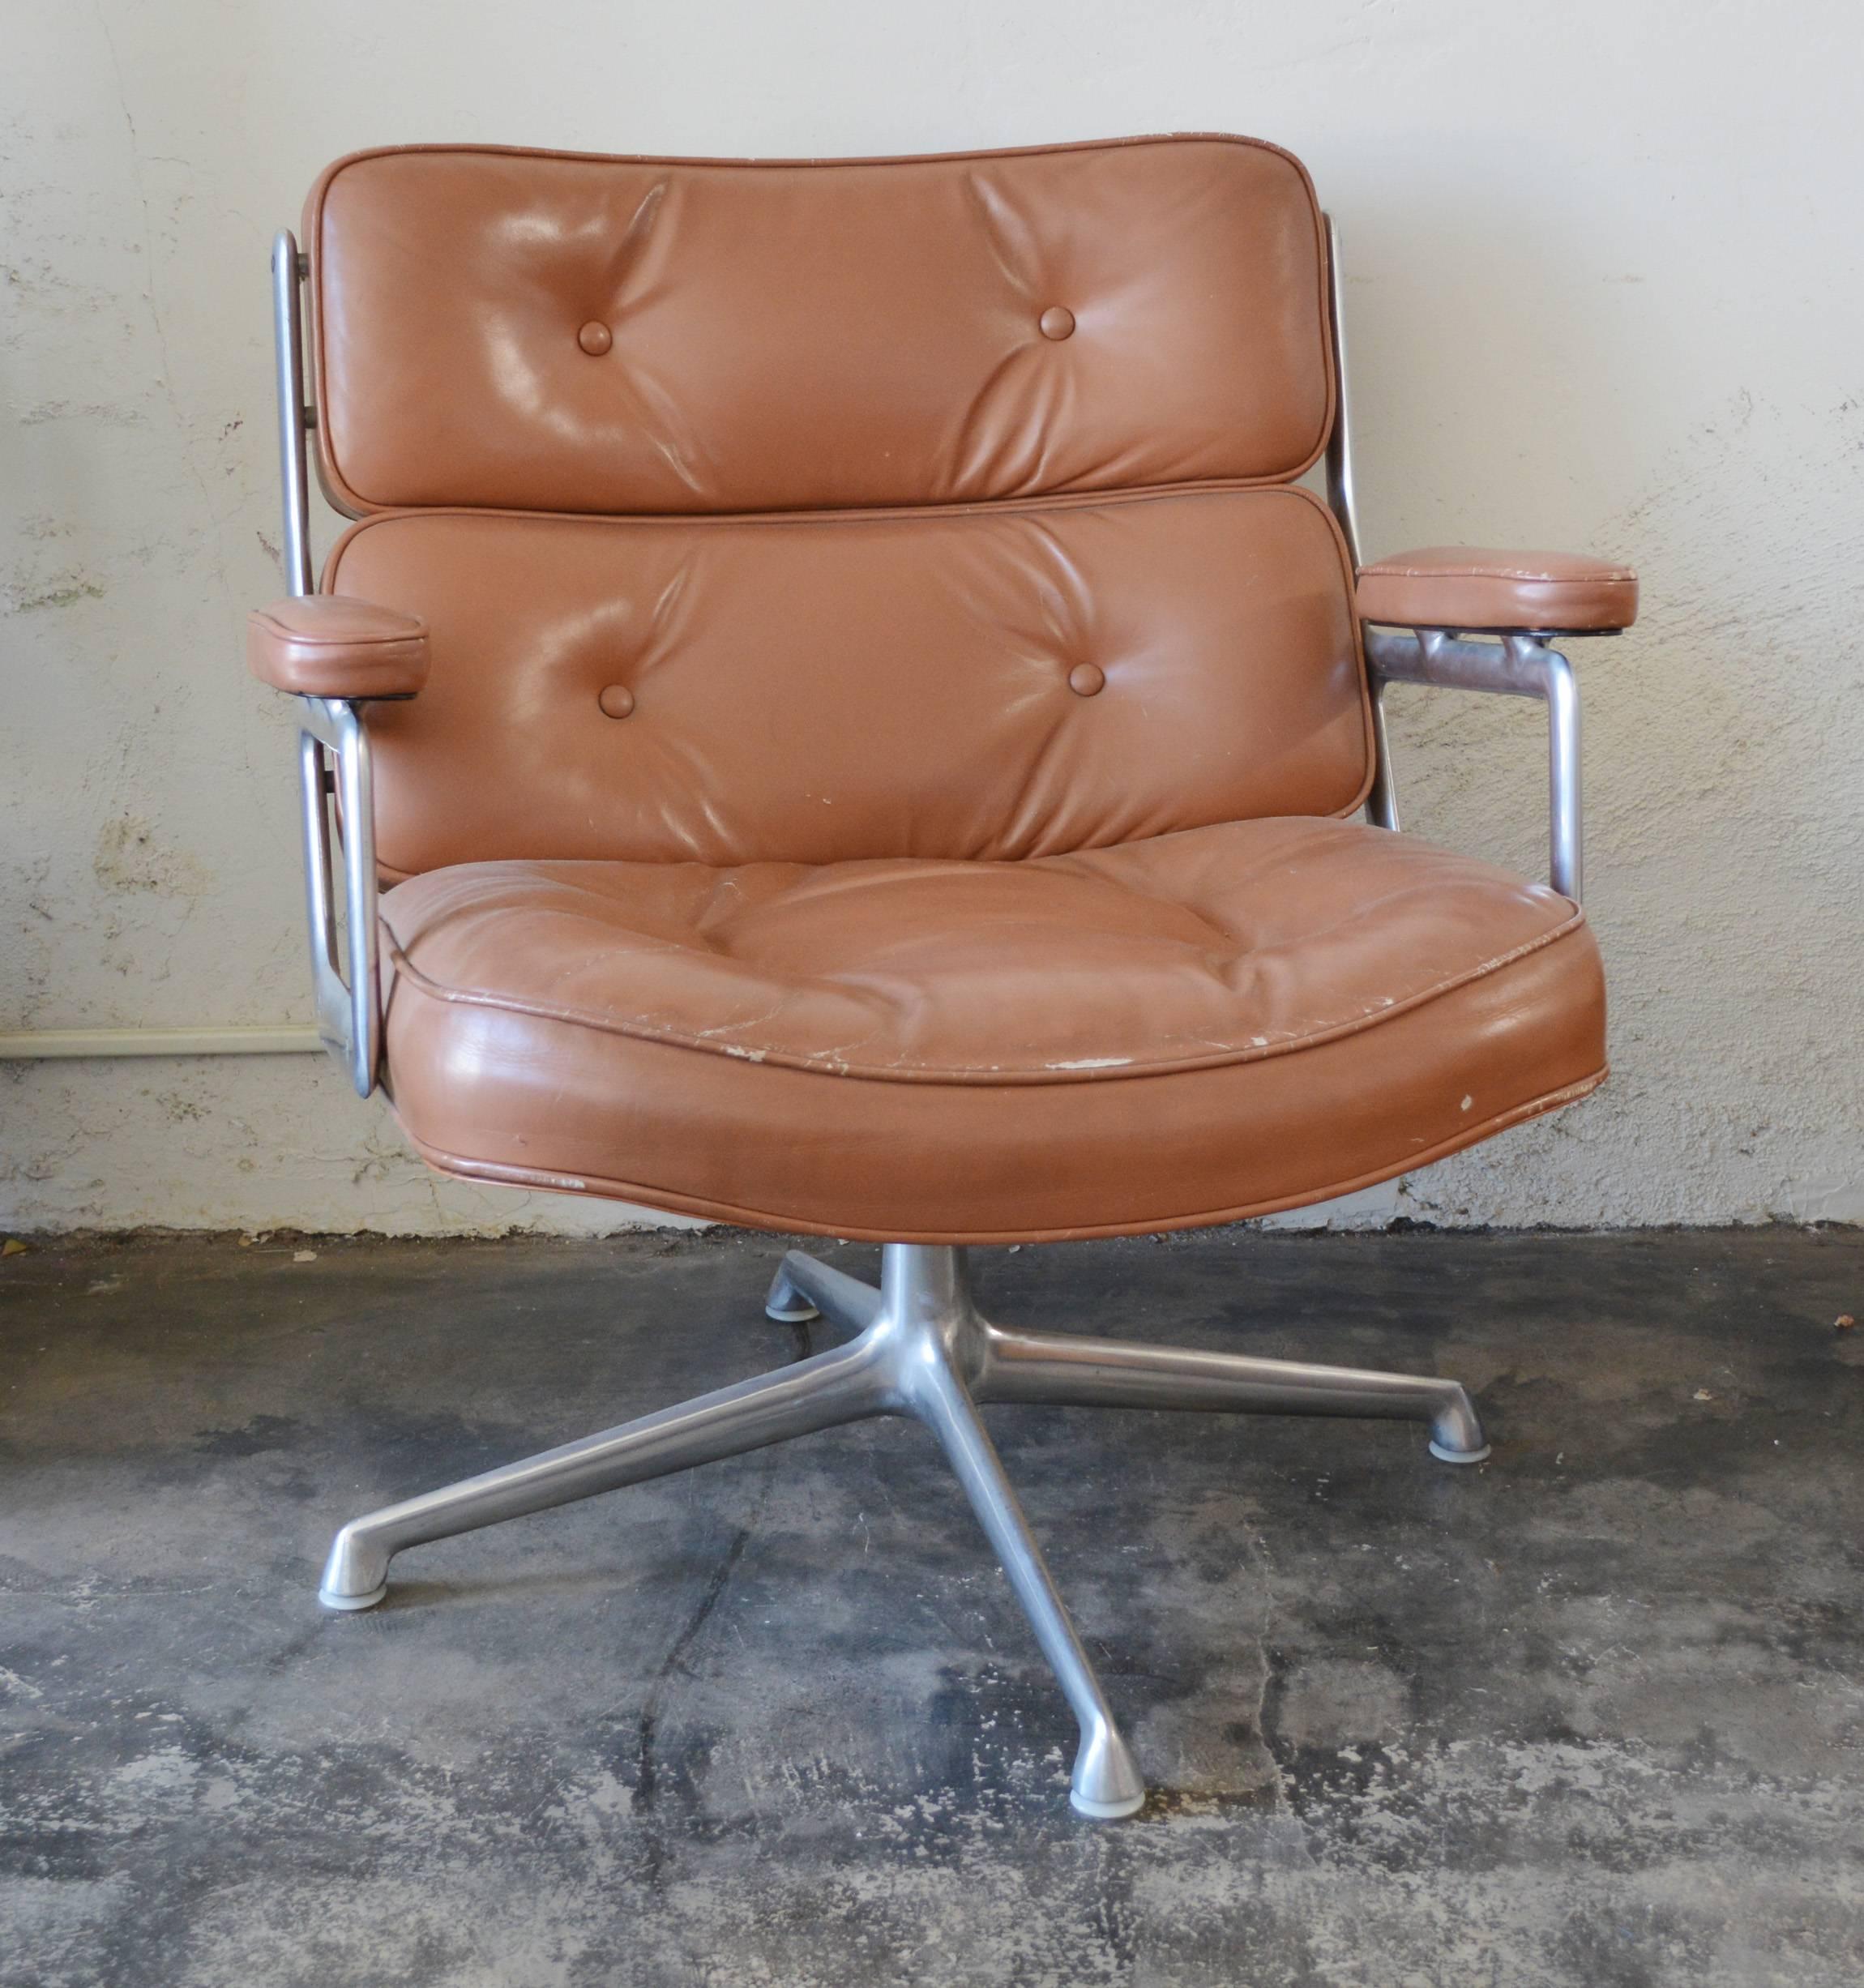 Charles Eames Executive chair designed for the lobbies of the Time-Life building in 1959. This is an early chair dating to circa 1961. The chair is all original. The leather has some losses to the surface but is not torn. The chair swivels 360